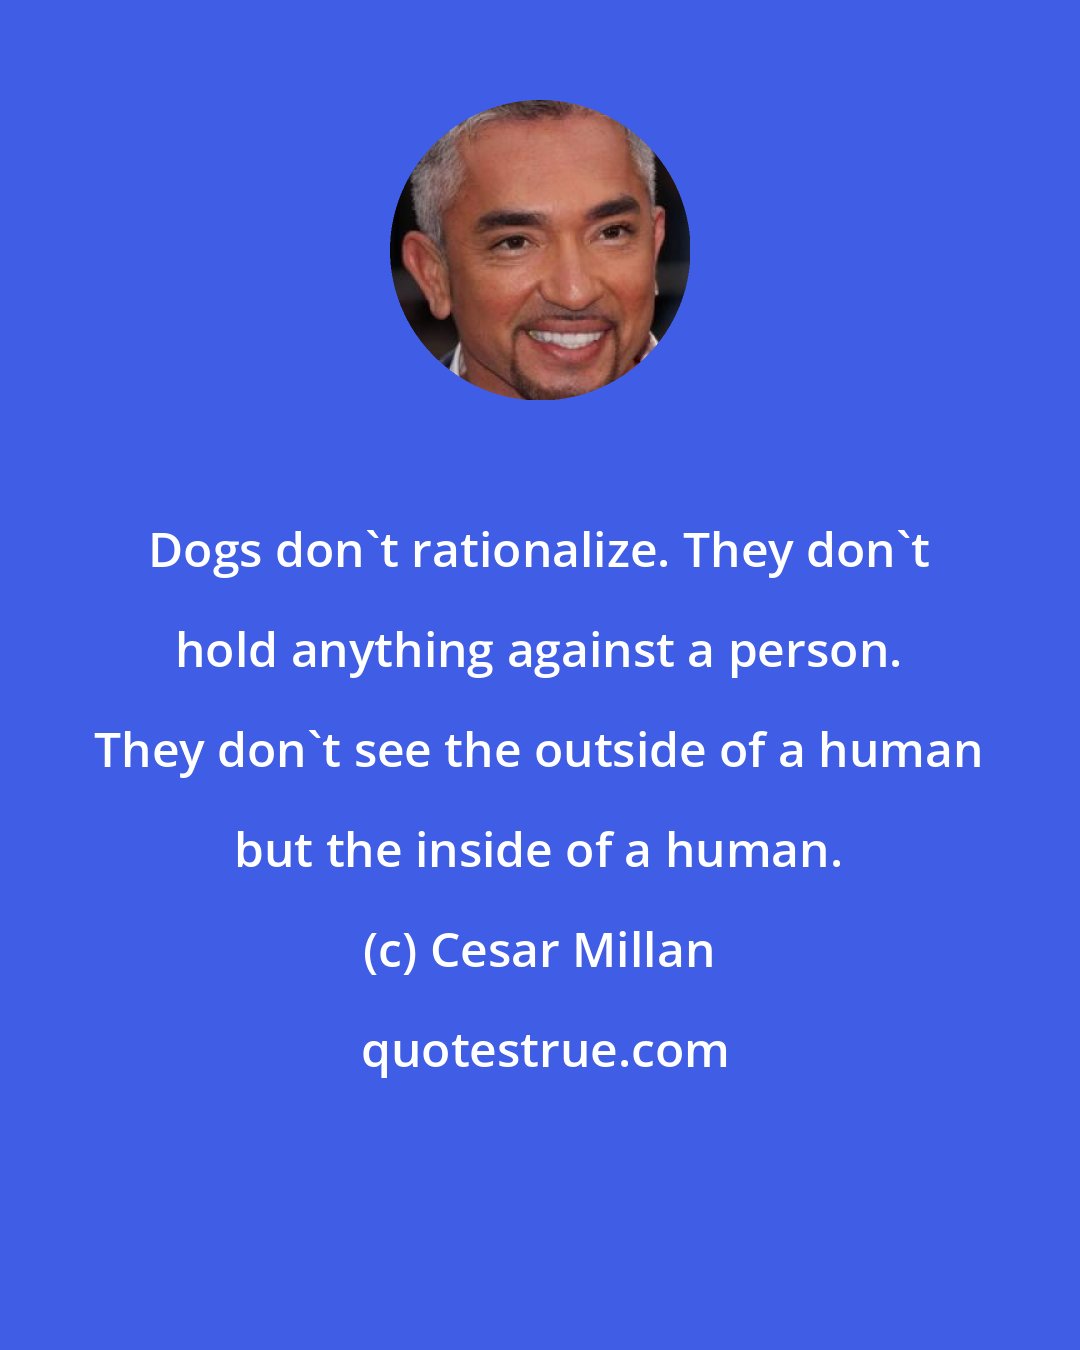 Cesar Millan: Dogs don't rationalize. They don't hold anything against a person. They don't see the outside of a human but the inside of a human.